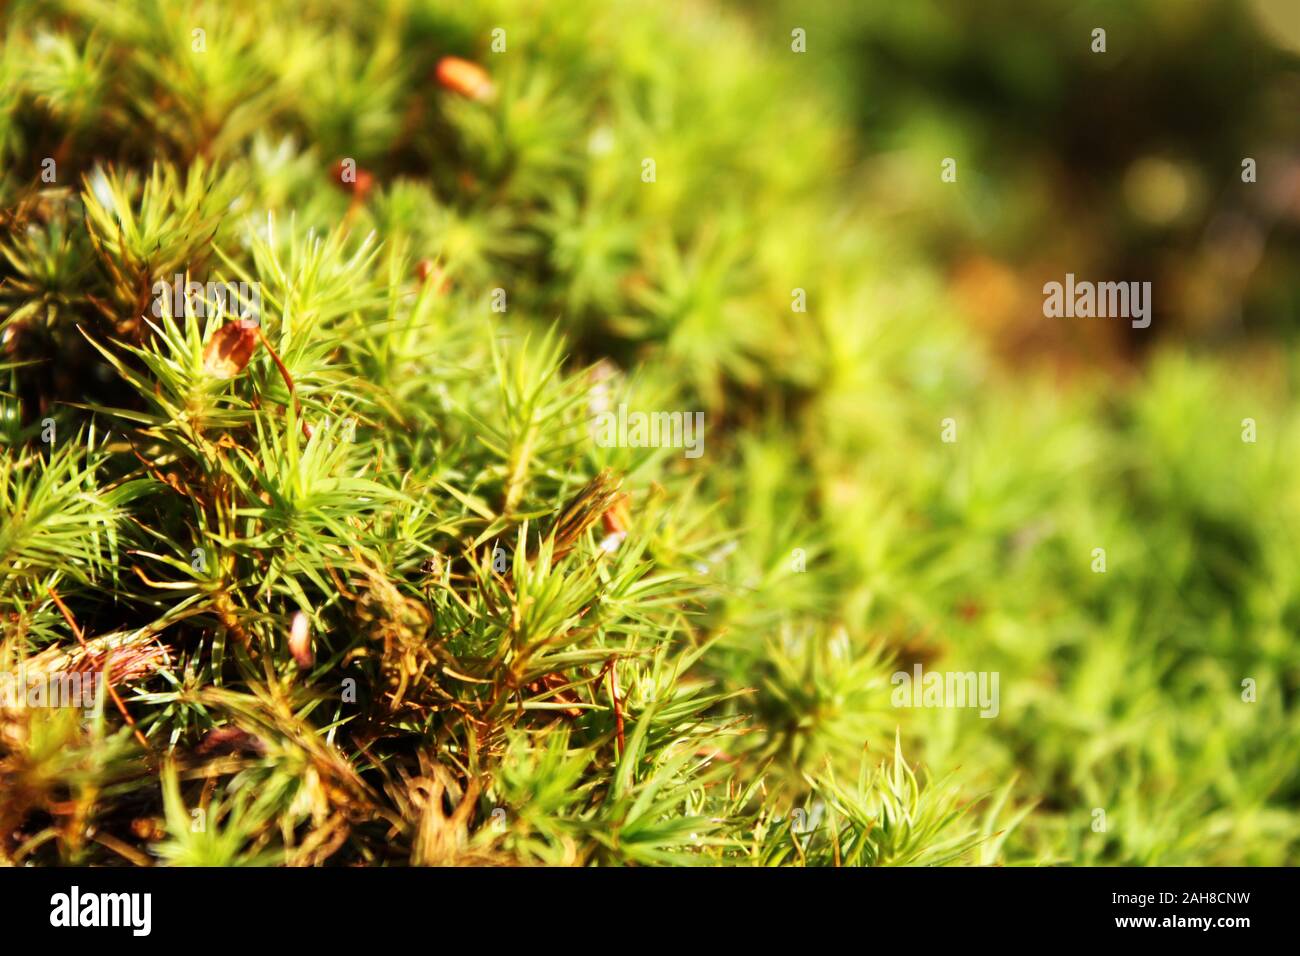 Macro view of fresh green color polytrichum moss Polytrichum. Close up. Natural background view. Selective soft focus. Shallow depth of field. Stock Photo